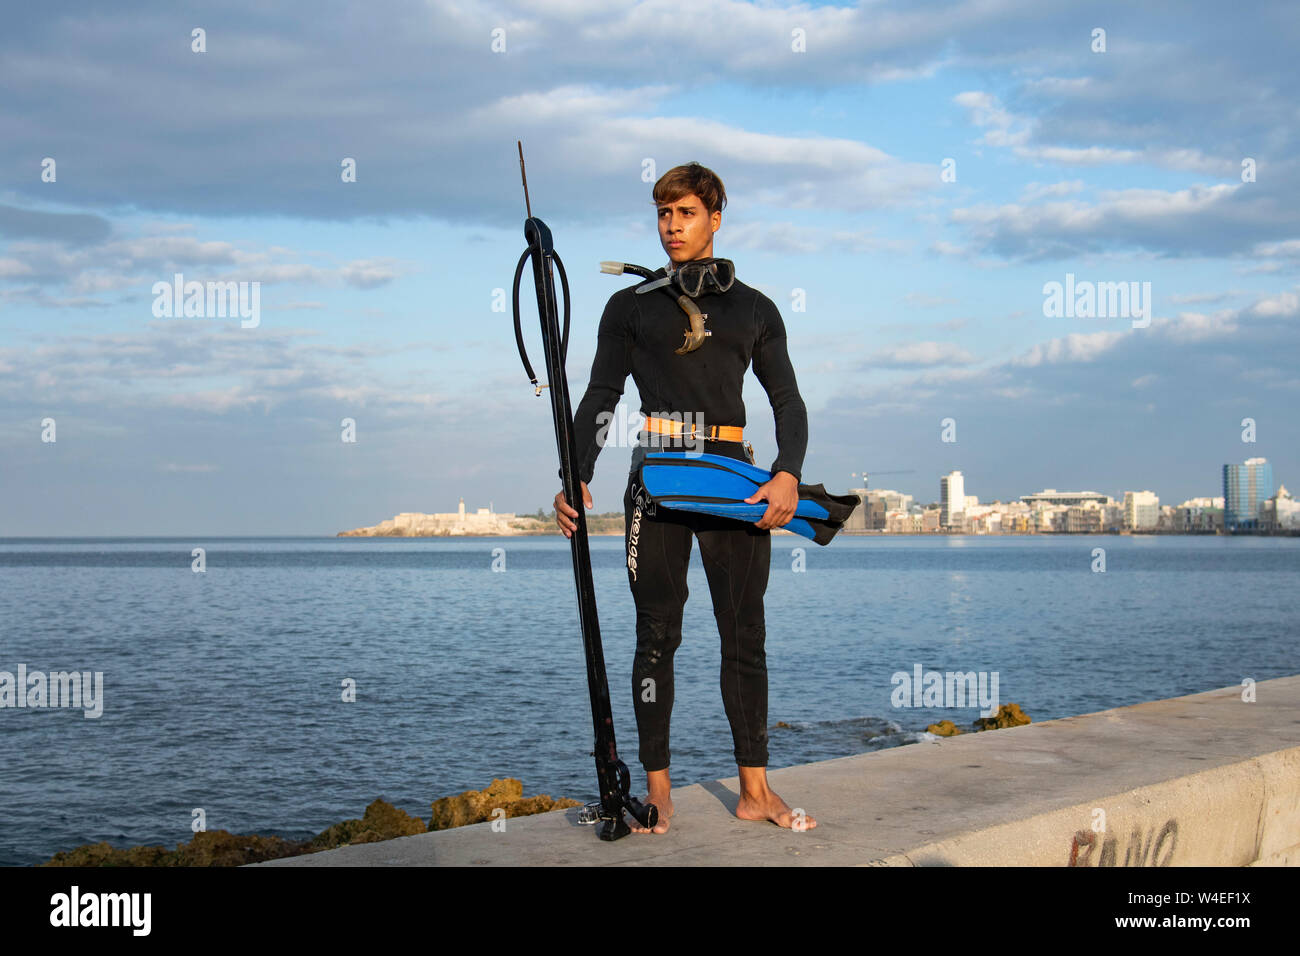 Young Cuban man dressed in his wetsuit poises on Havana's Malecon seawall before going diving into the Caribbean waters below Stock Photo